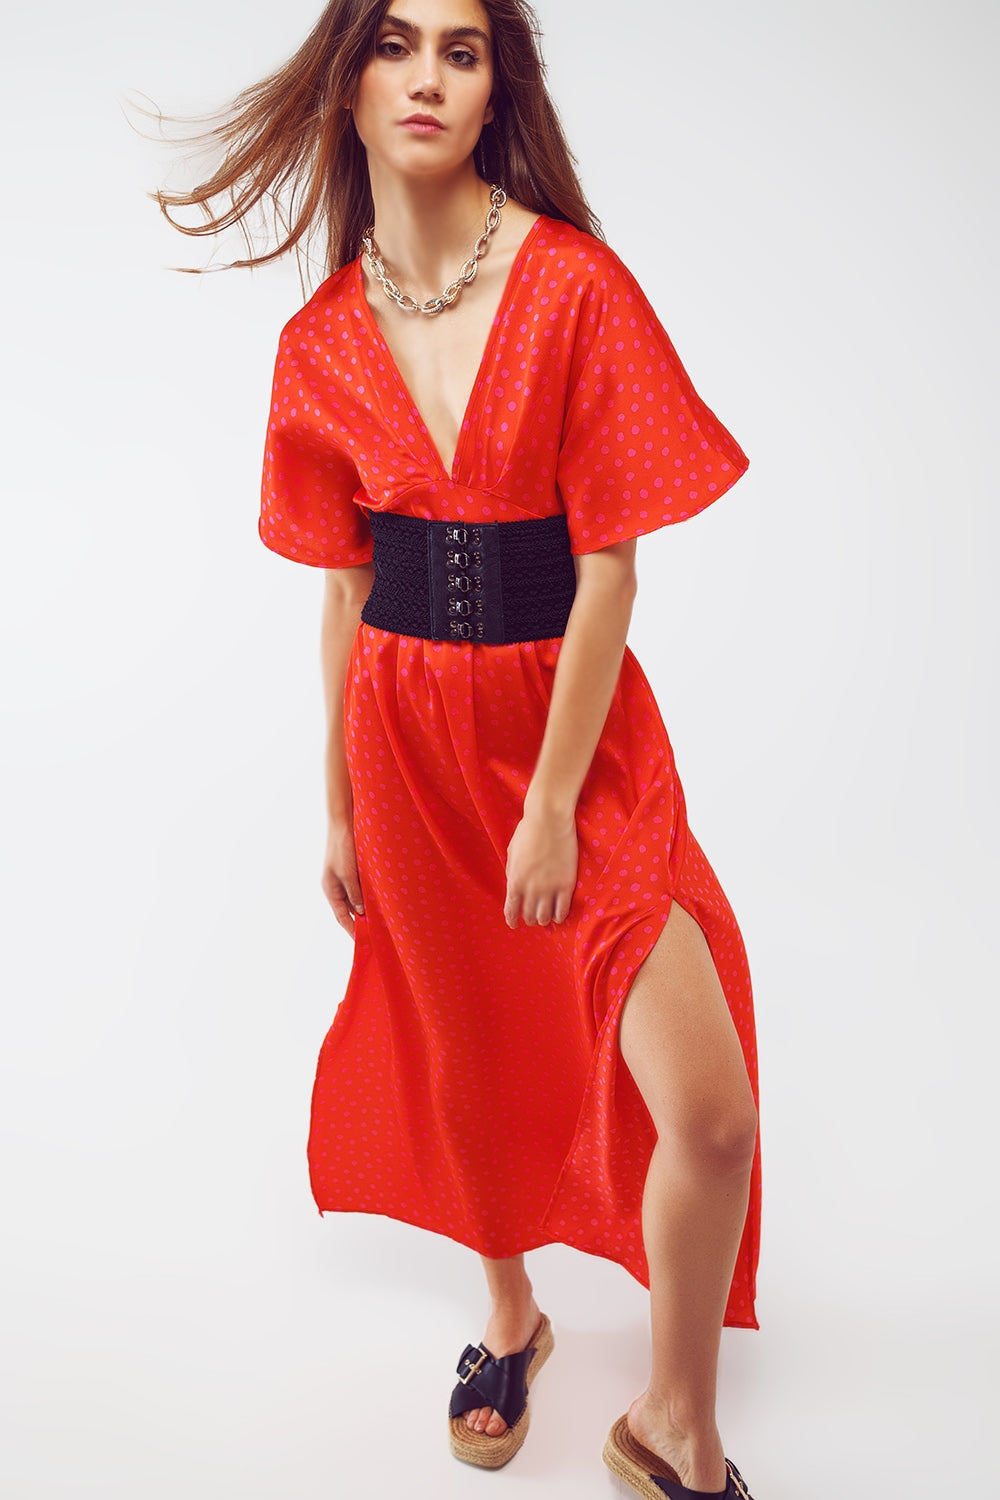 Maxi Cinched At The Waist Dress With Angel Sleeves In Red Polka Dot - Szua Store